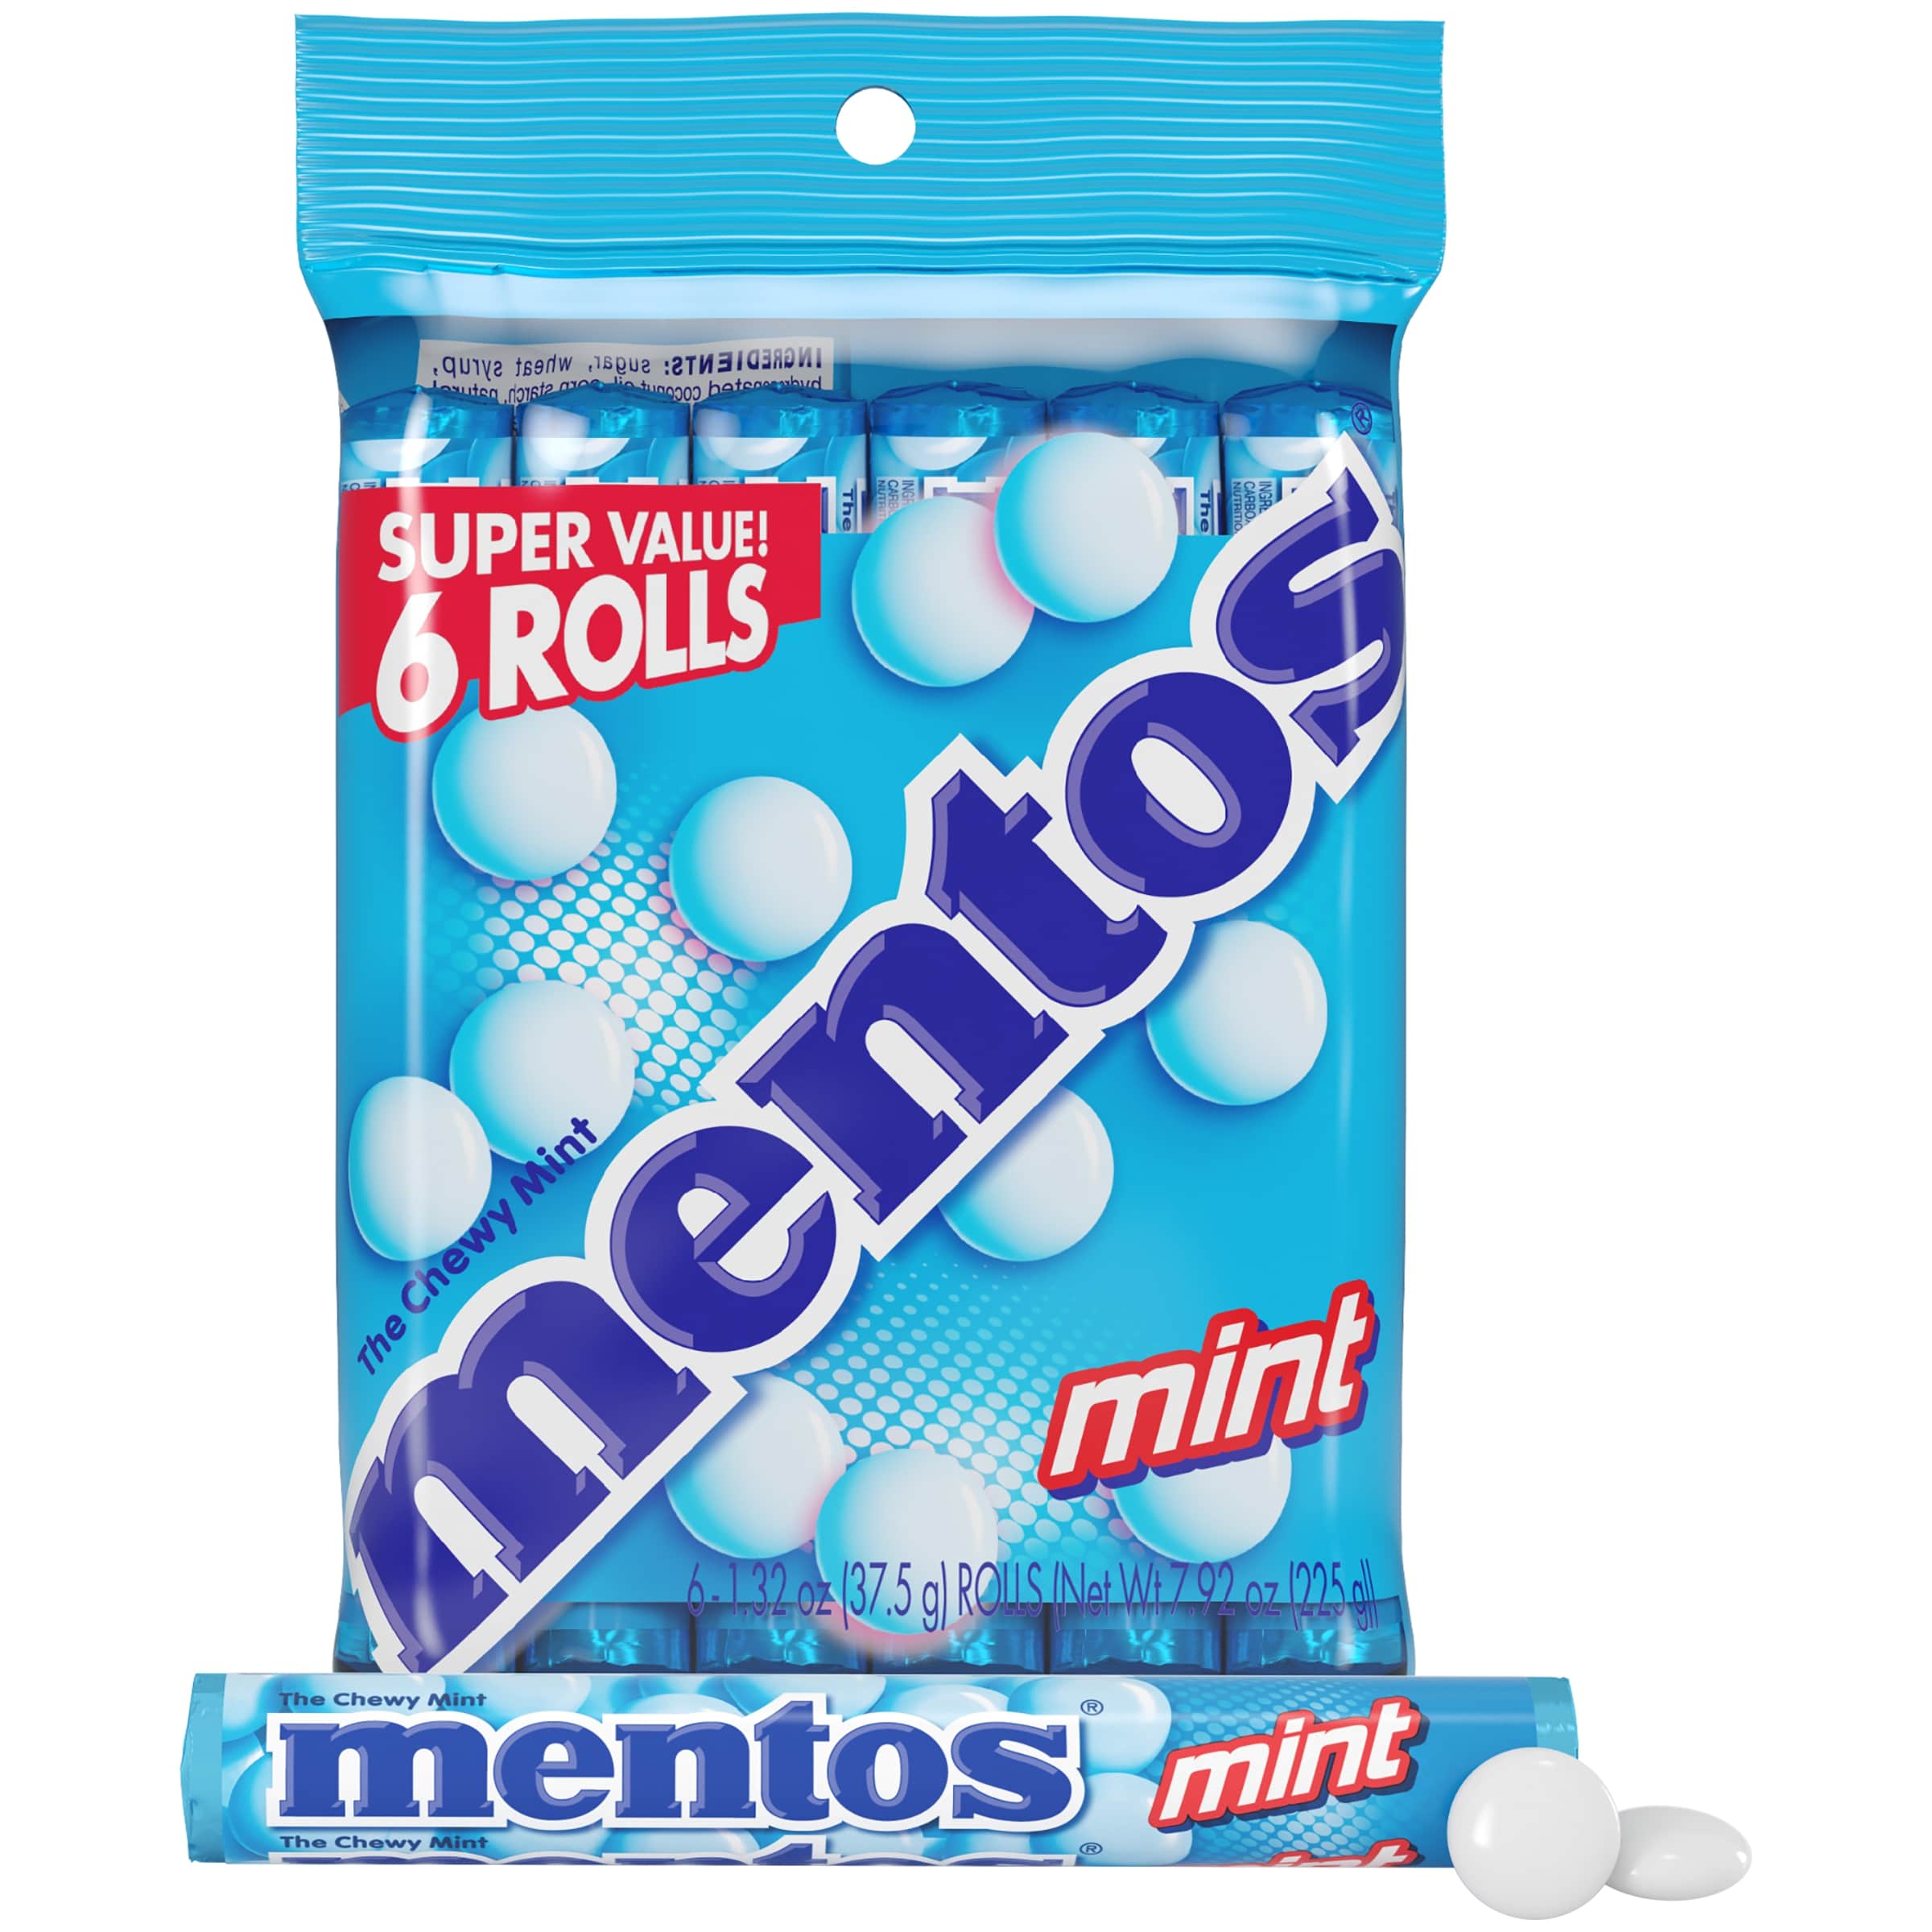 Mentos Chewy Mint Candy Roll, Peppermint, Peanut Free, Regular Size, 1.32 oz, 6 Count - image 1 of 8